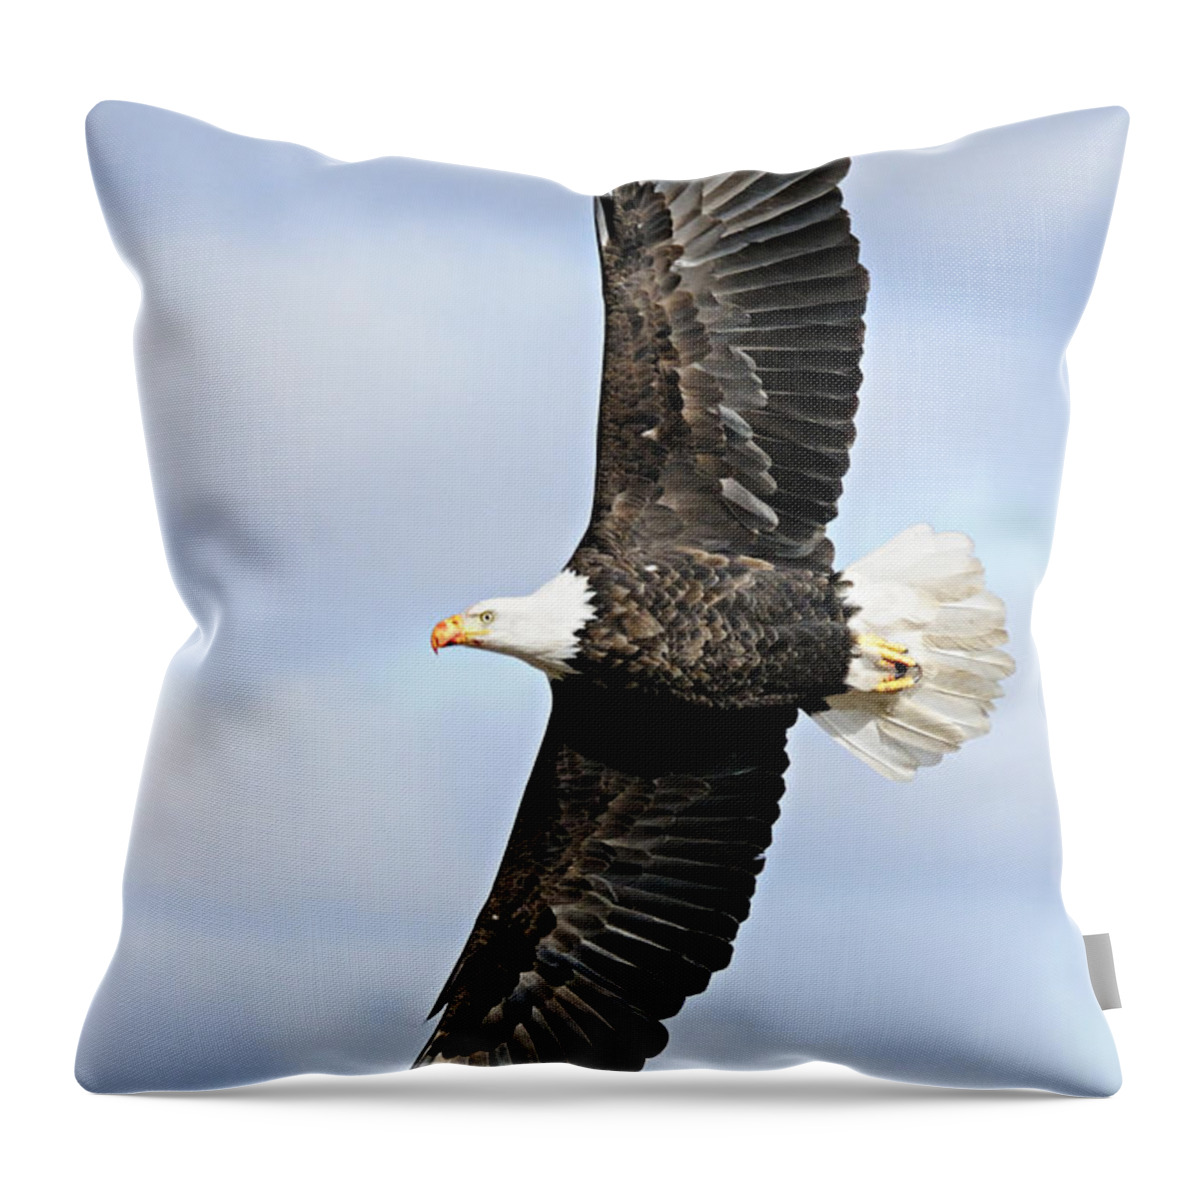 Photography Throw Pillow featuring the photograph Soaring Eagle by Larry Ricker